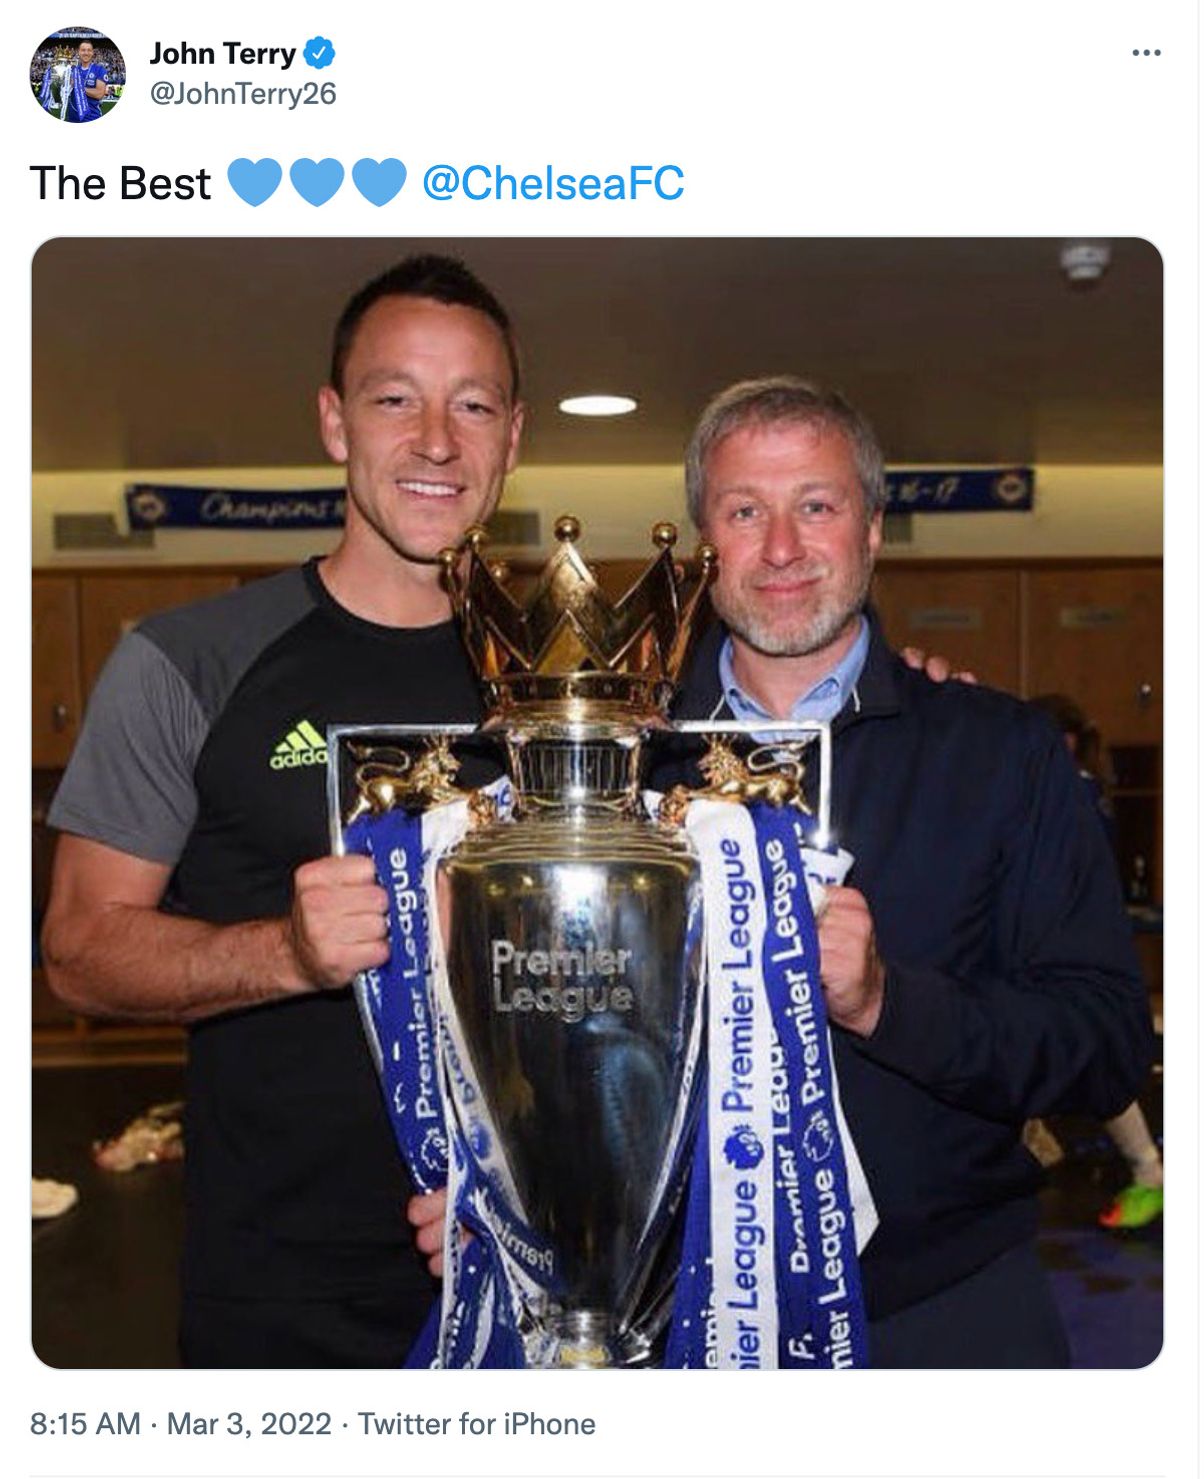 John Terry's post to the Chelsea owner